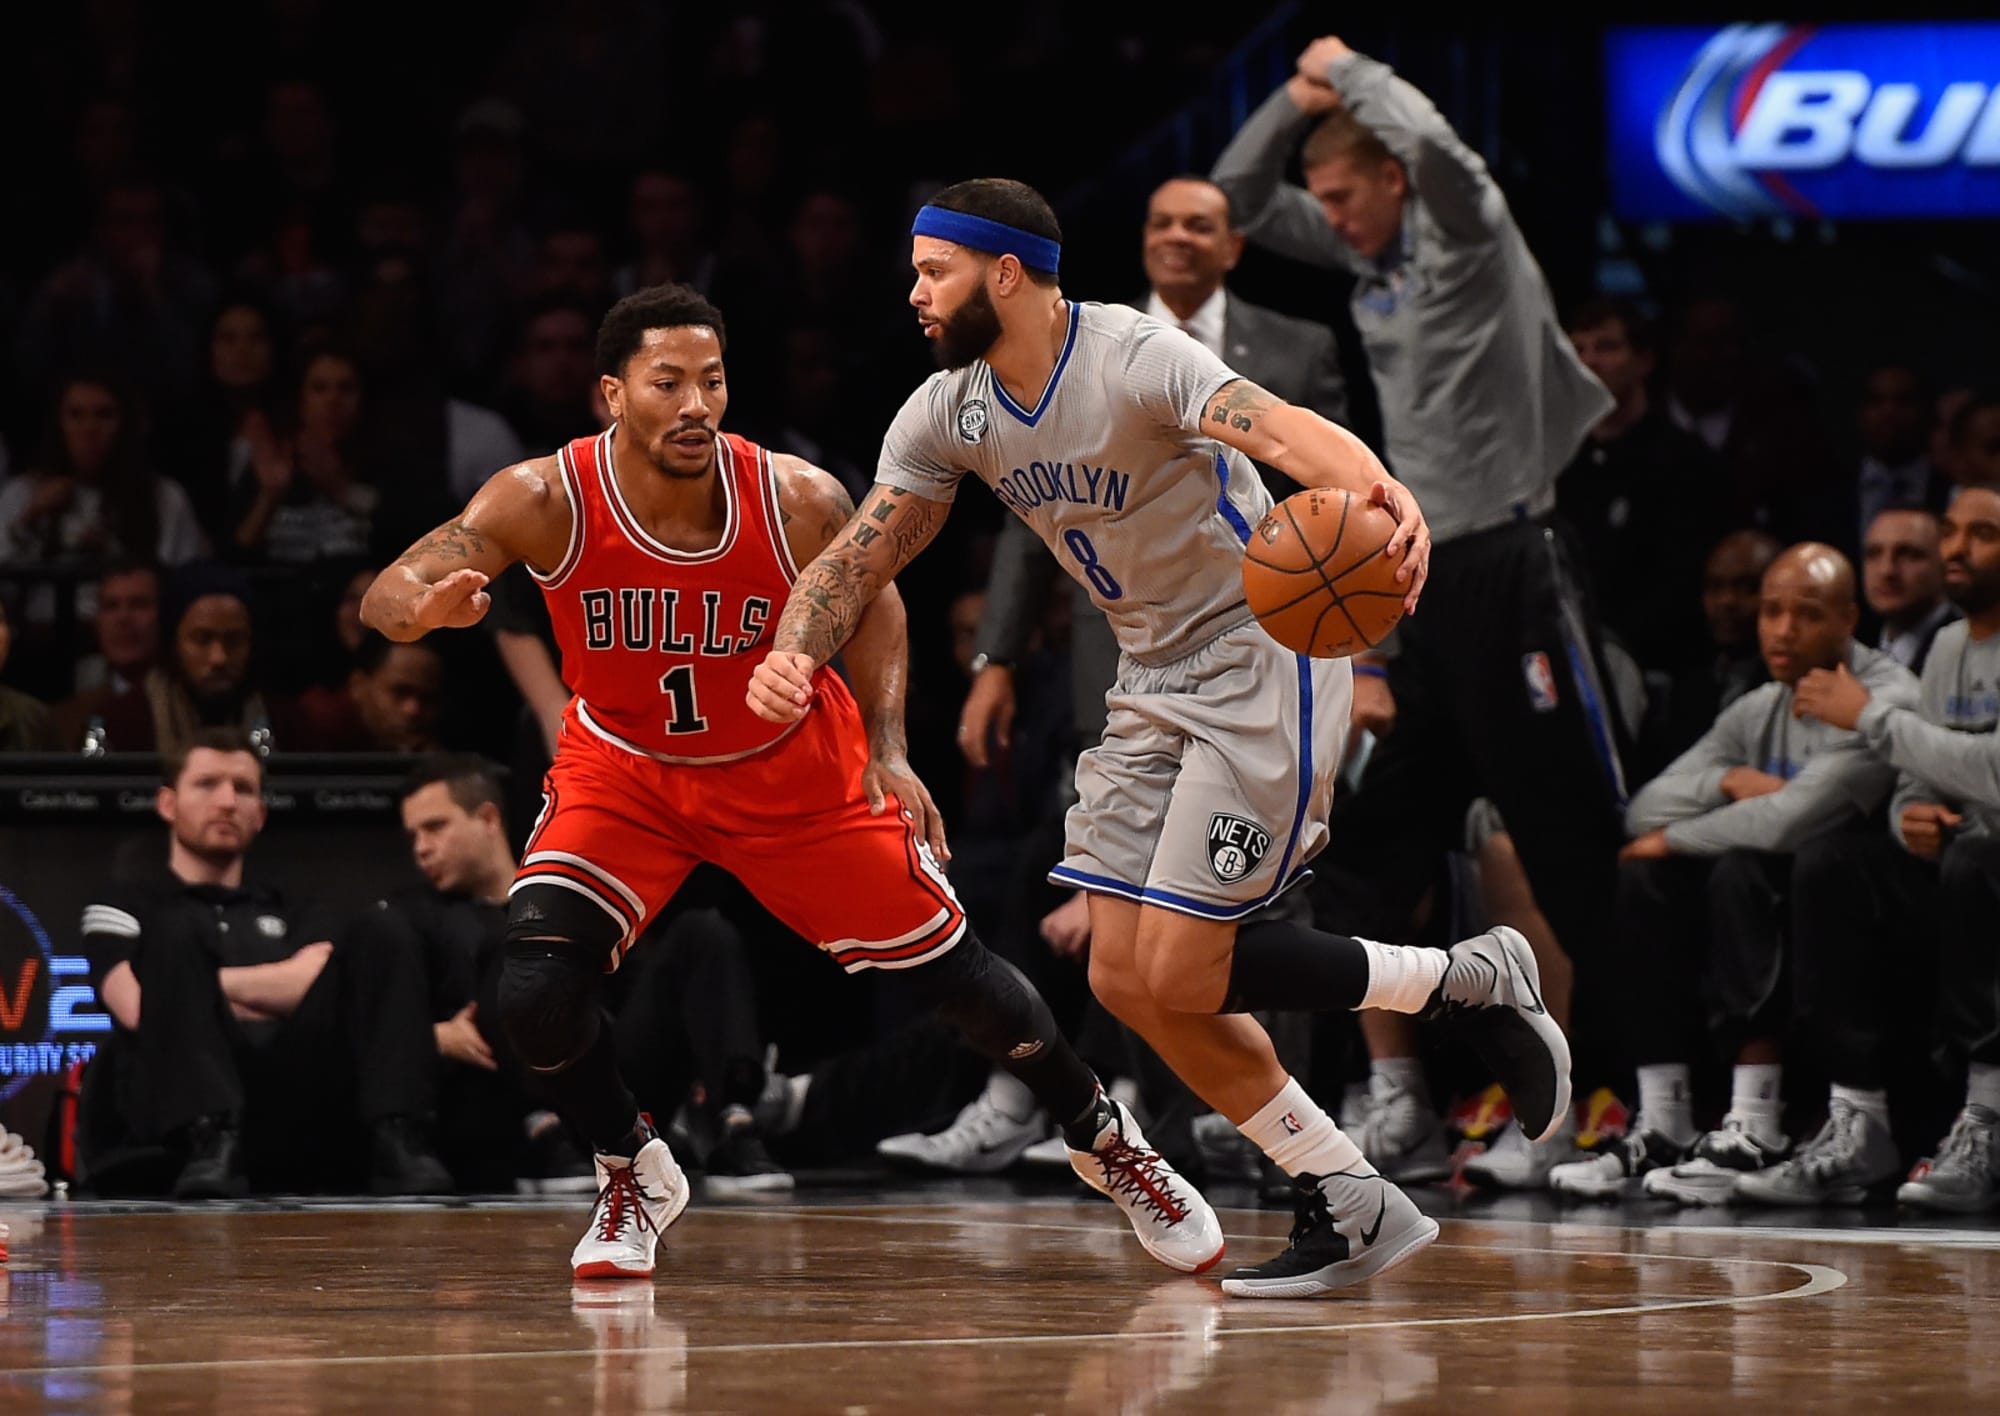 Derrick Rose's defense could provide Wolves a boost off bench